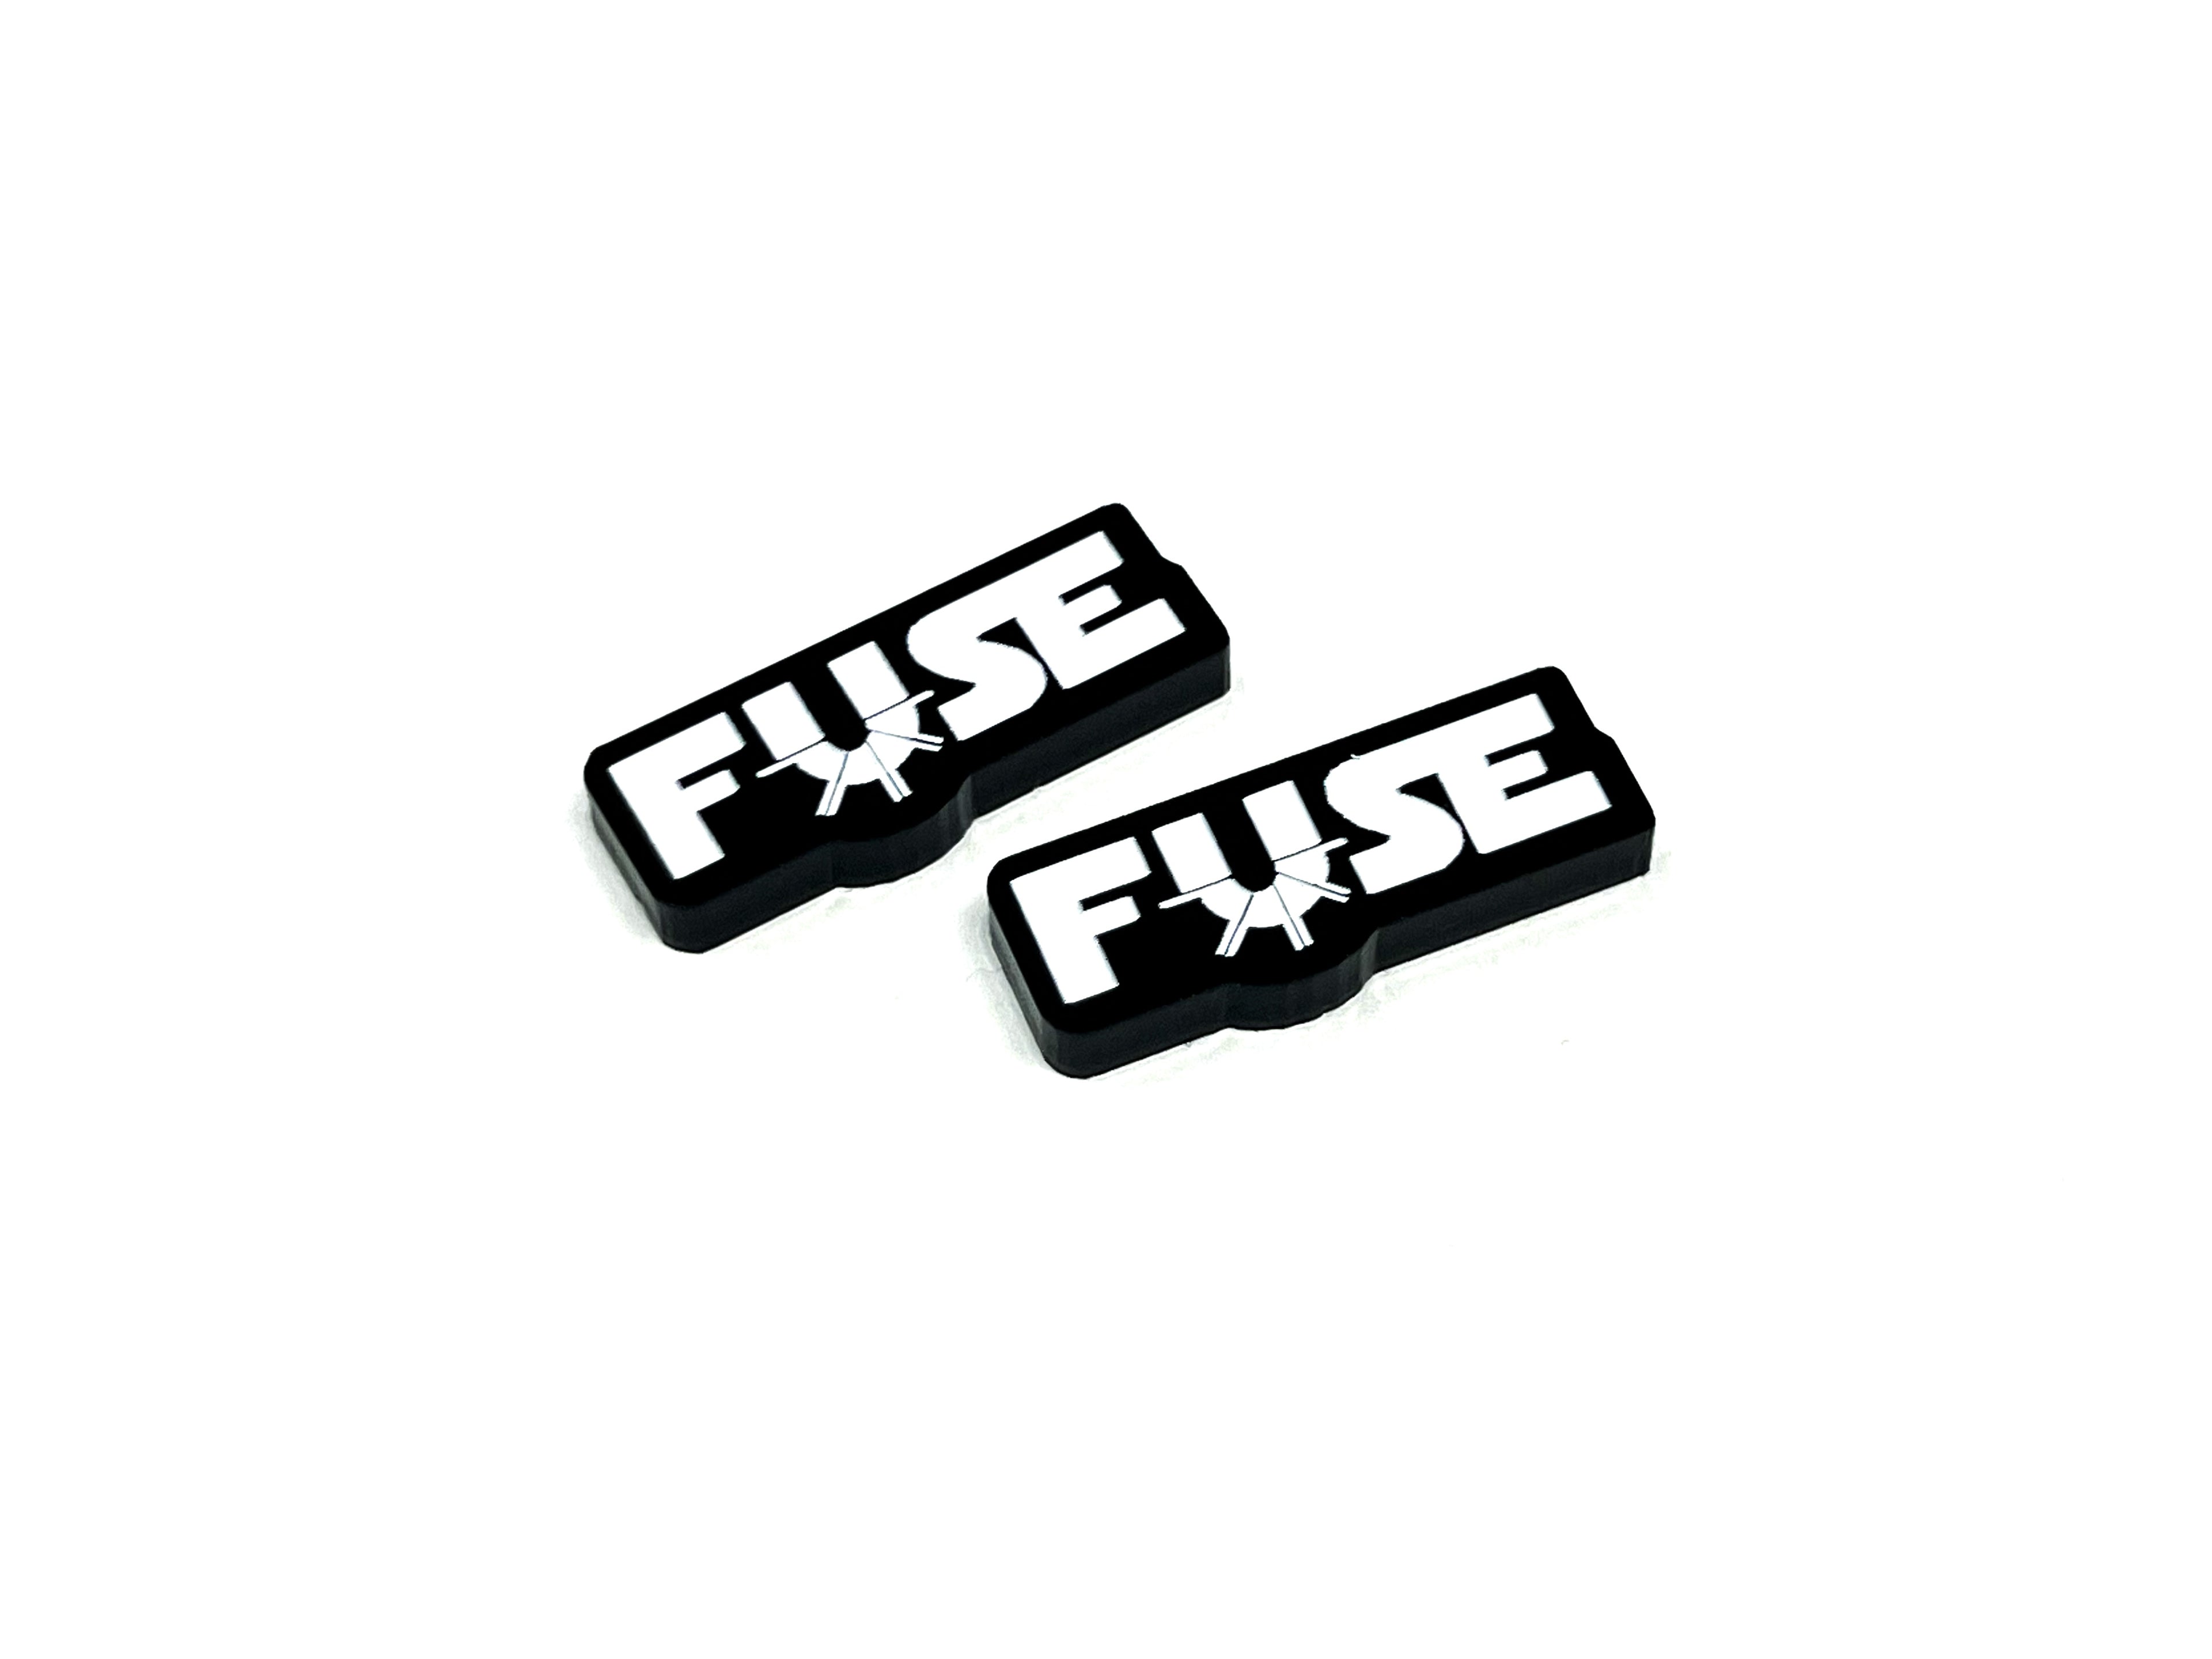 2 x Fuse Tokens - Text Series (Single Sided)